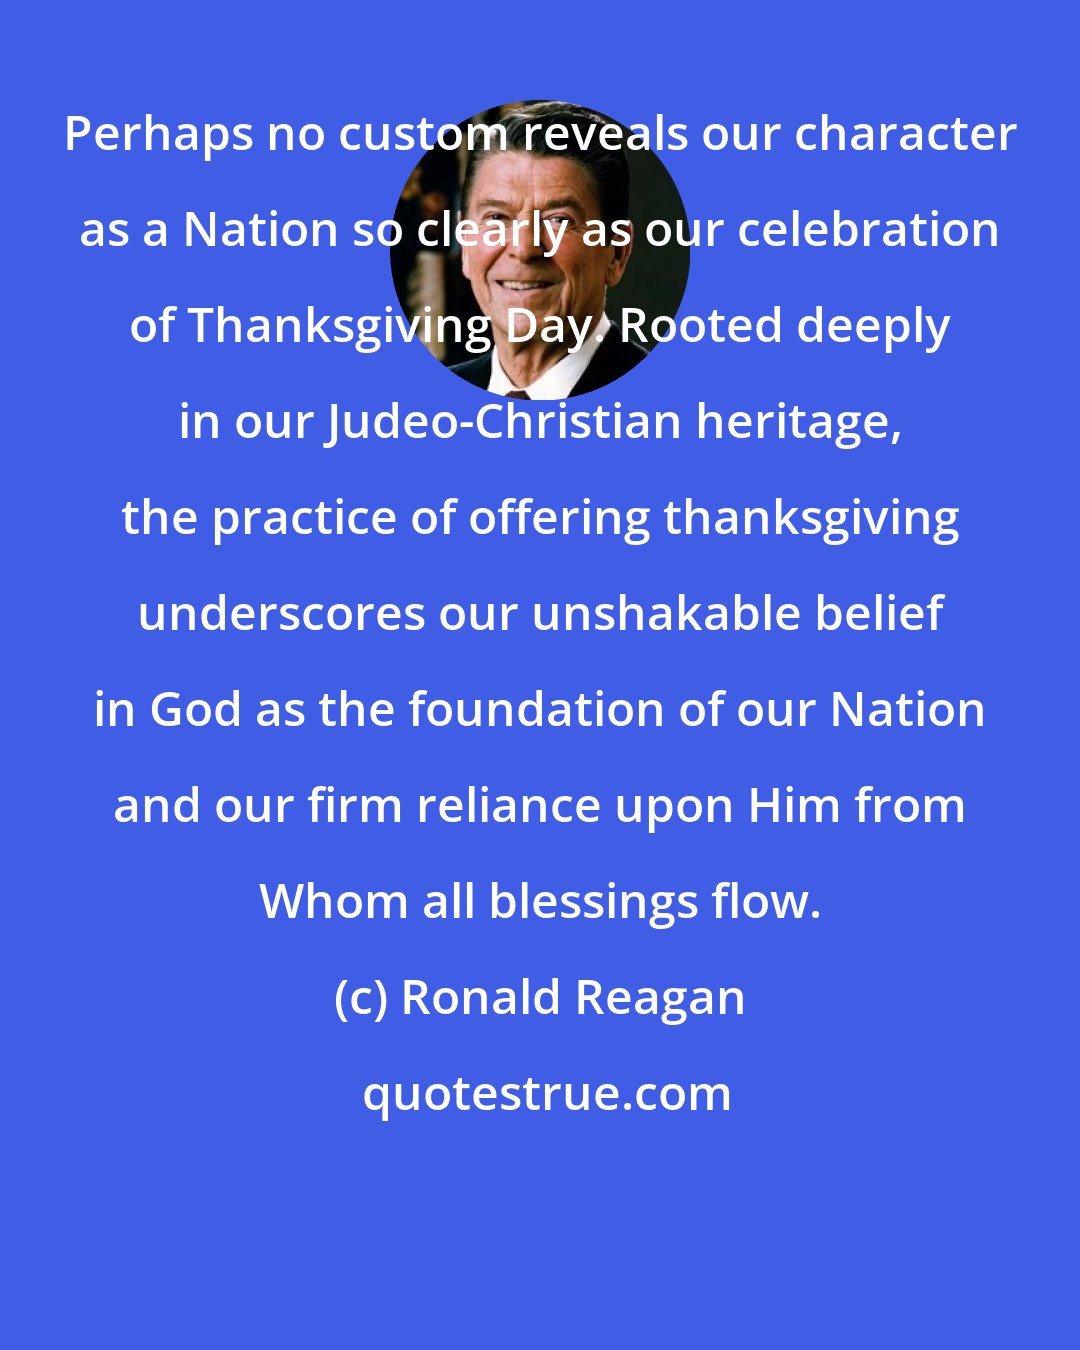 Ronald Reagan: Perhaps no custom reveals our character as a Nation so clearly as our celebration of Thanksgiving Day. Rooted deeply in our Judeo-Christian heritage, the practice of offering thanksgiving underscores our unshakable belief in God as the foundation of our Nation and our firm reliance upon Him from Whom all blessings flow.